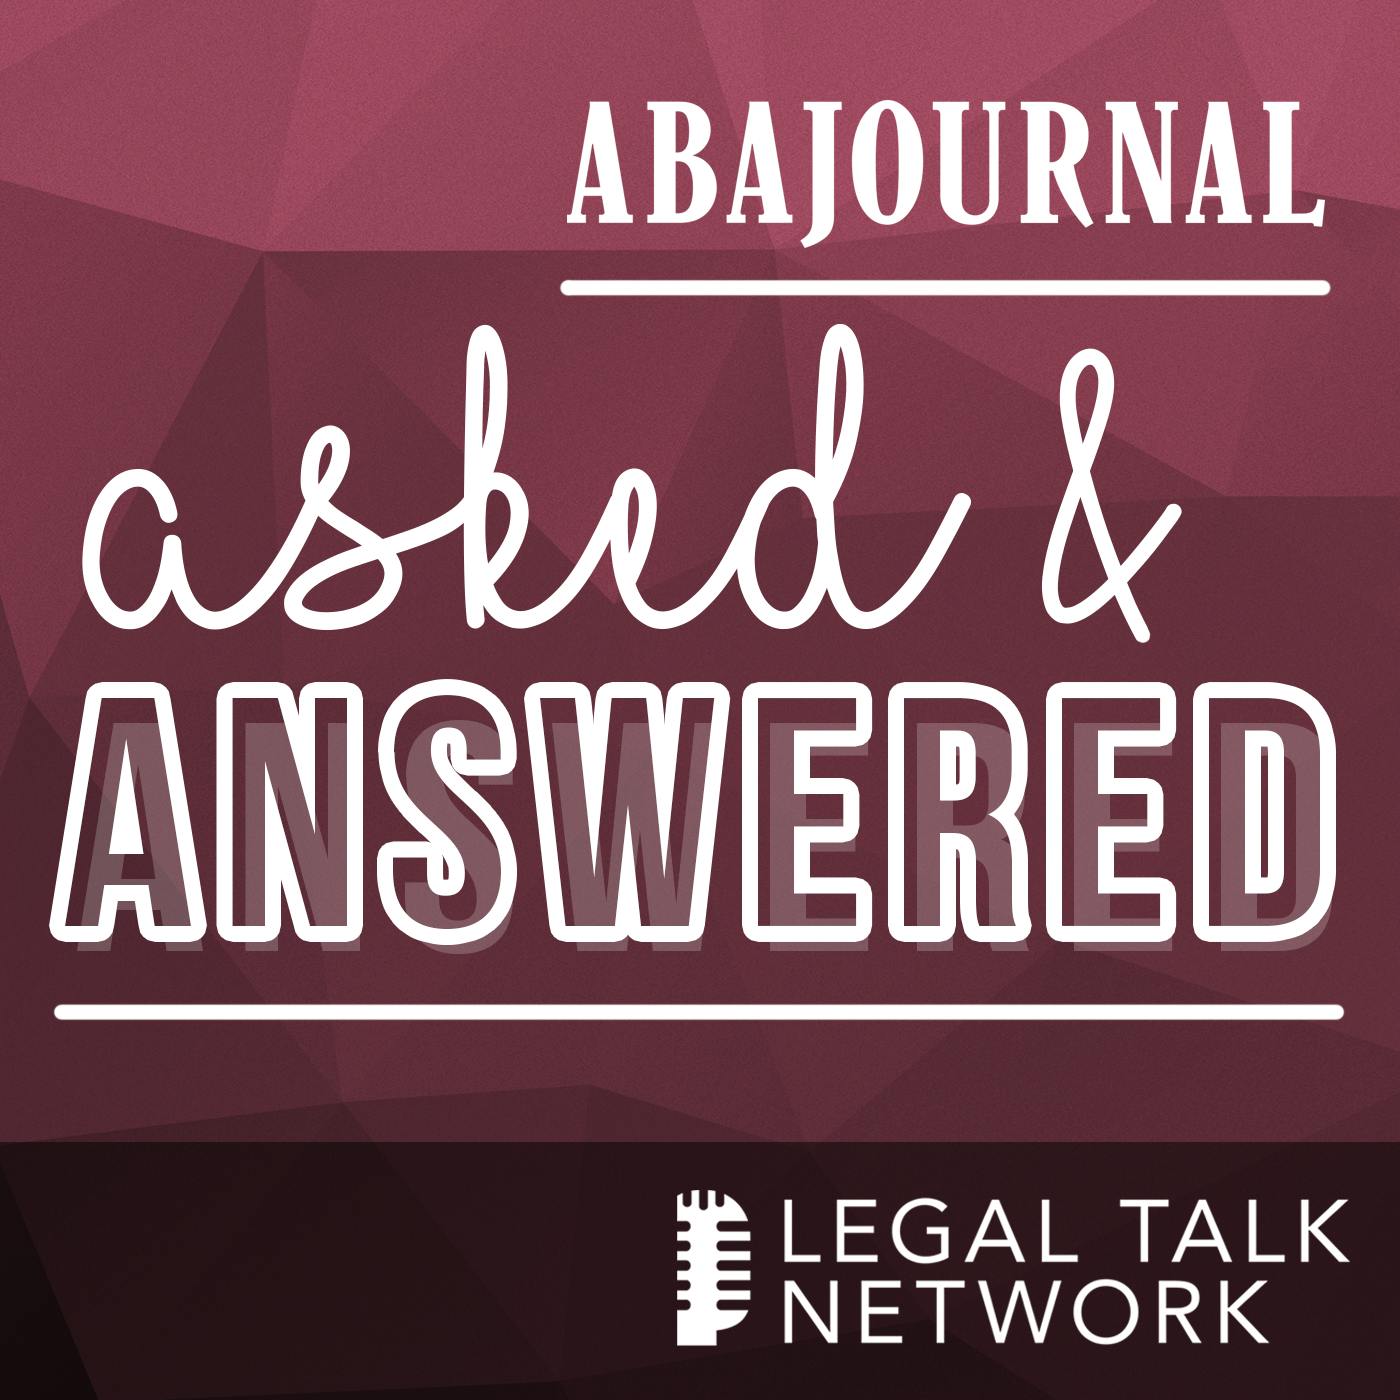 ABA Journal: Asked and Answered : Loving life as a lawyer: How to maintain joy in your work